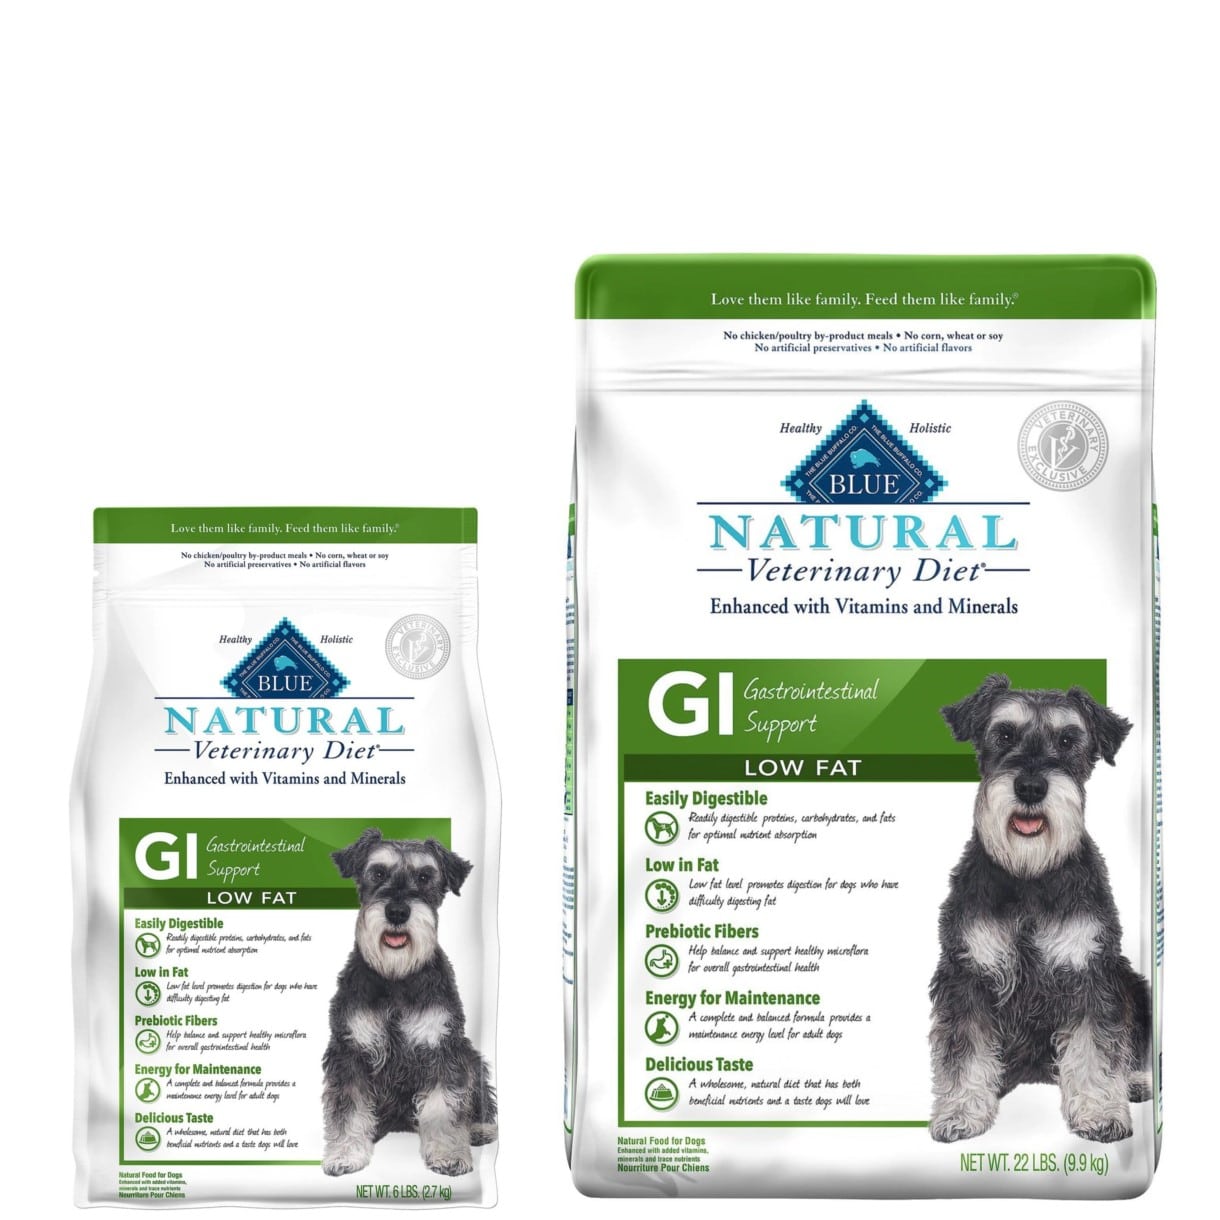 Blue Buffalo Natural Veterinary Diet GI Gastrointestinal Support Low Fat Dry Dog Food